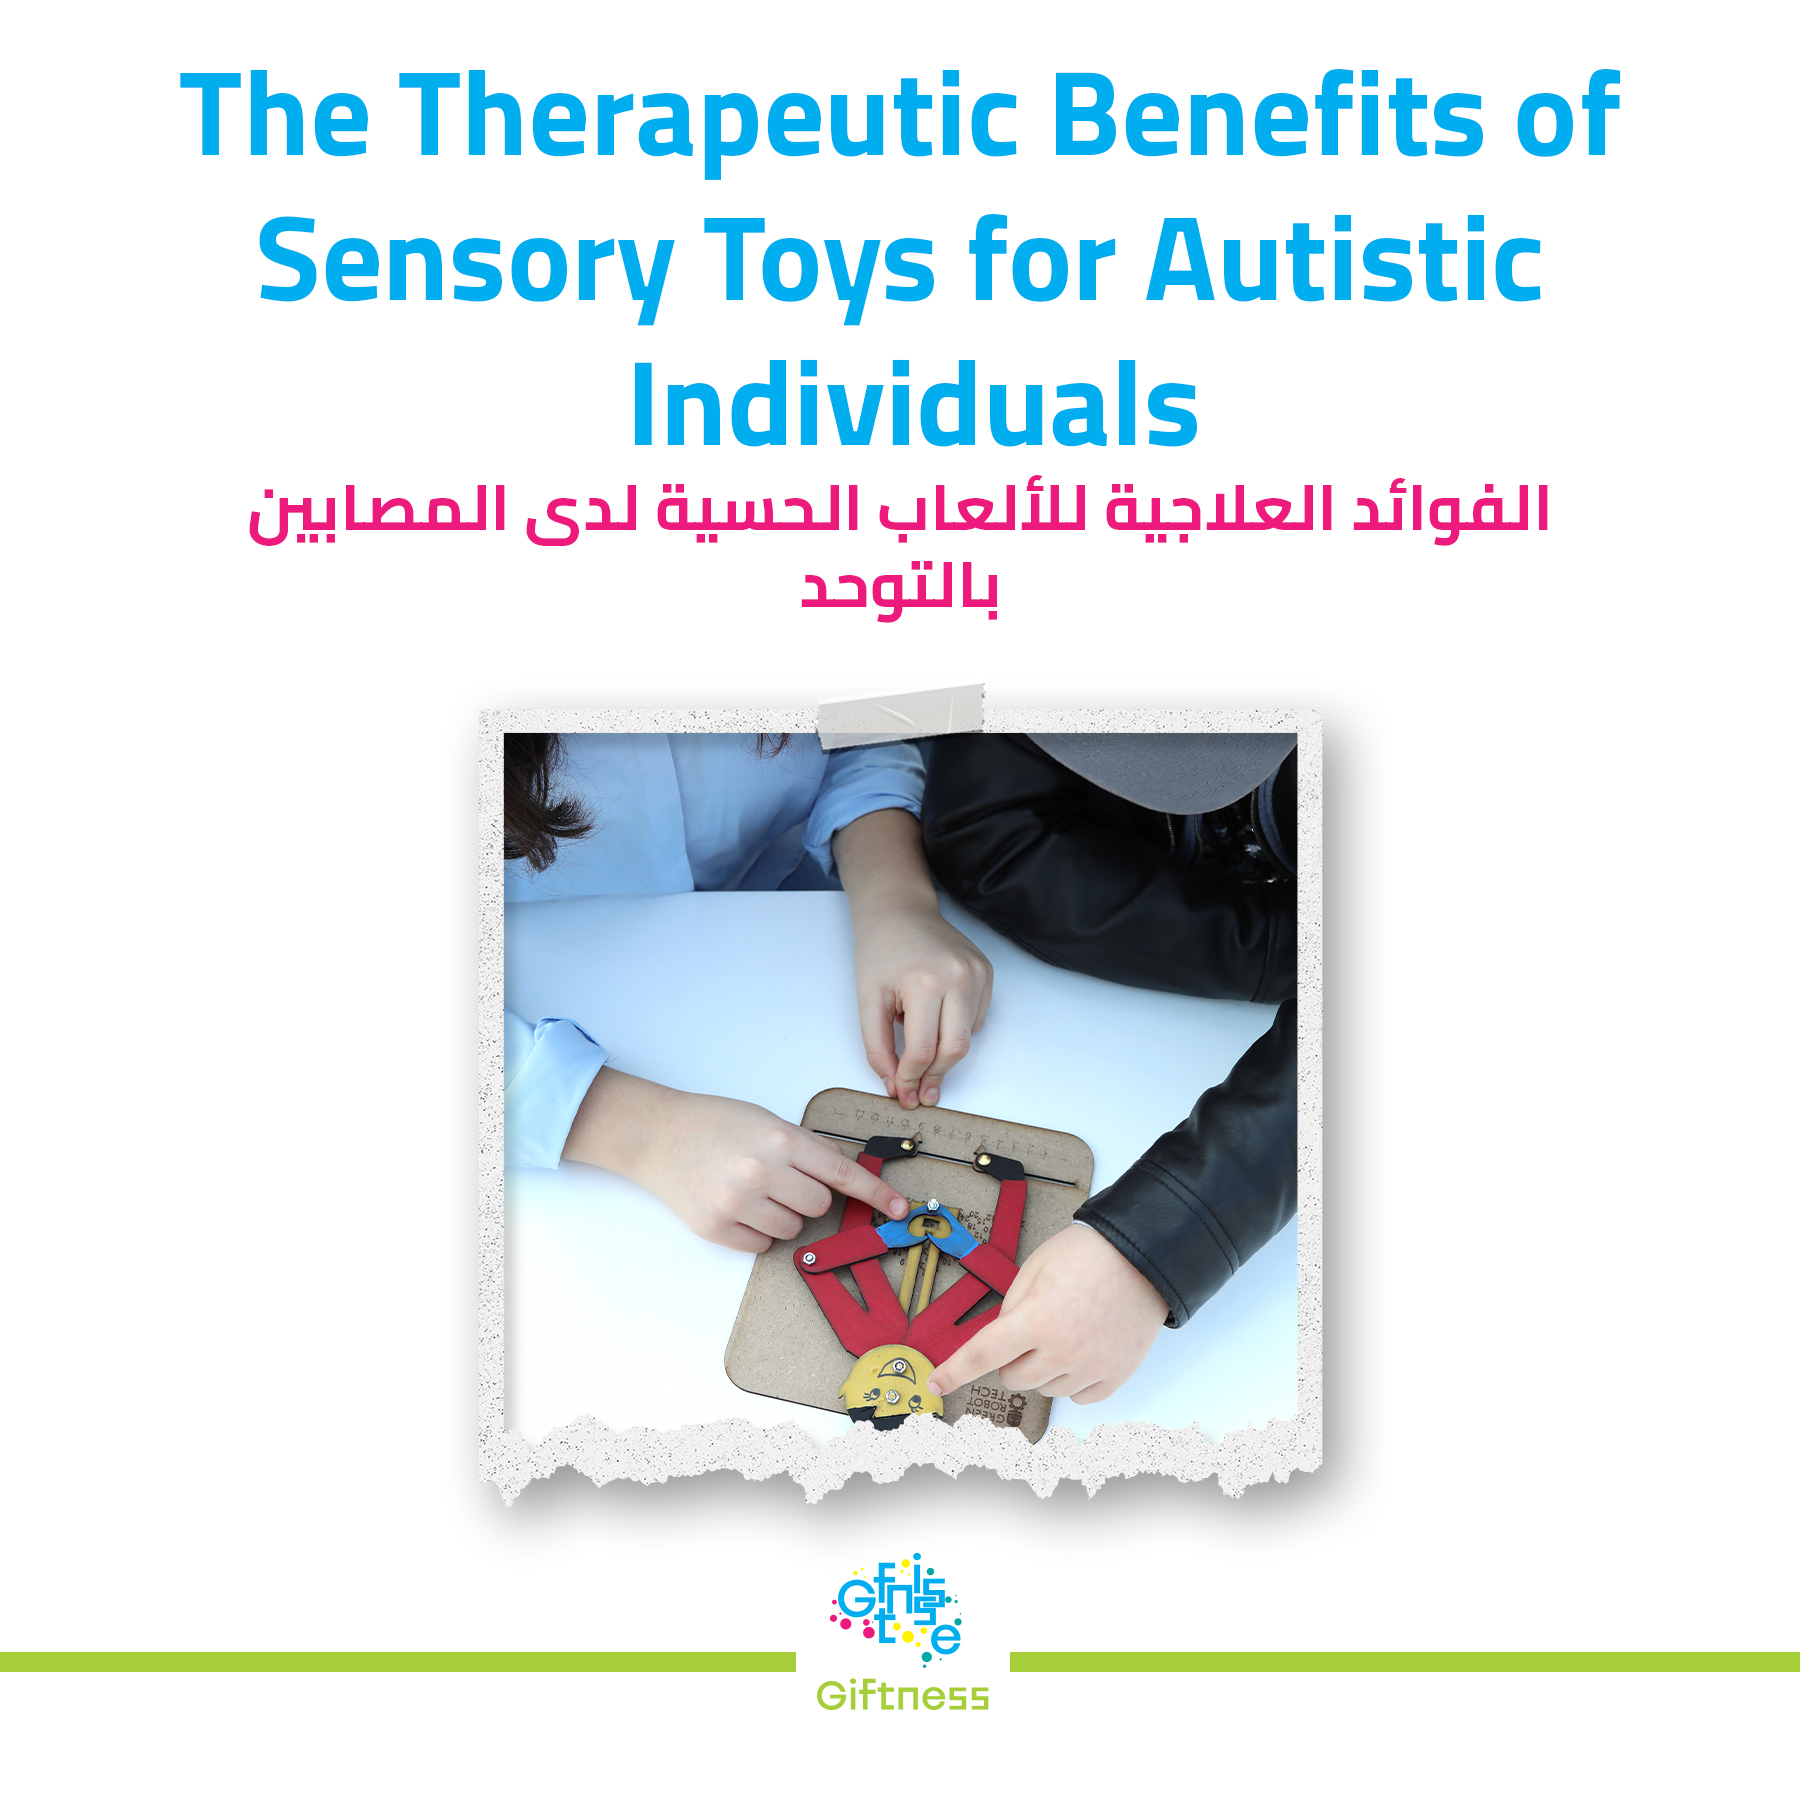 “The Therapeutic Benefits of Sensory Toys for Autistic Individuals”